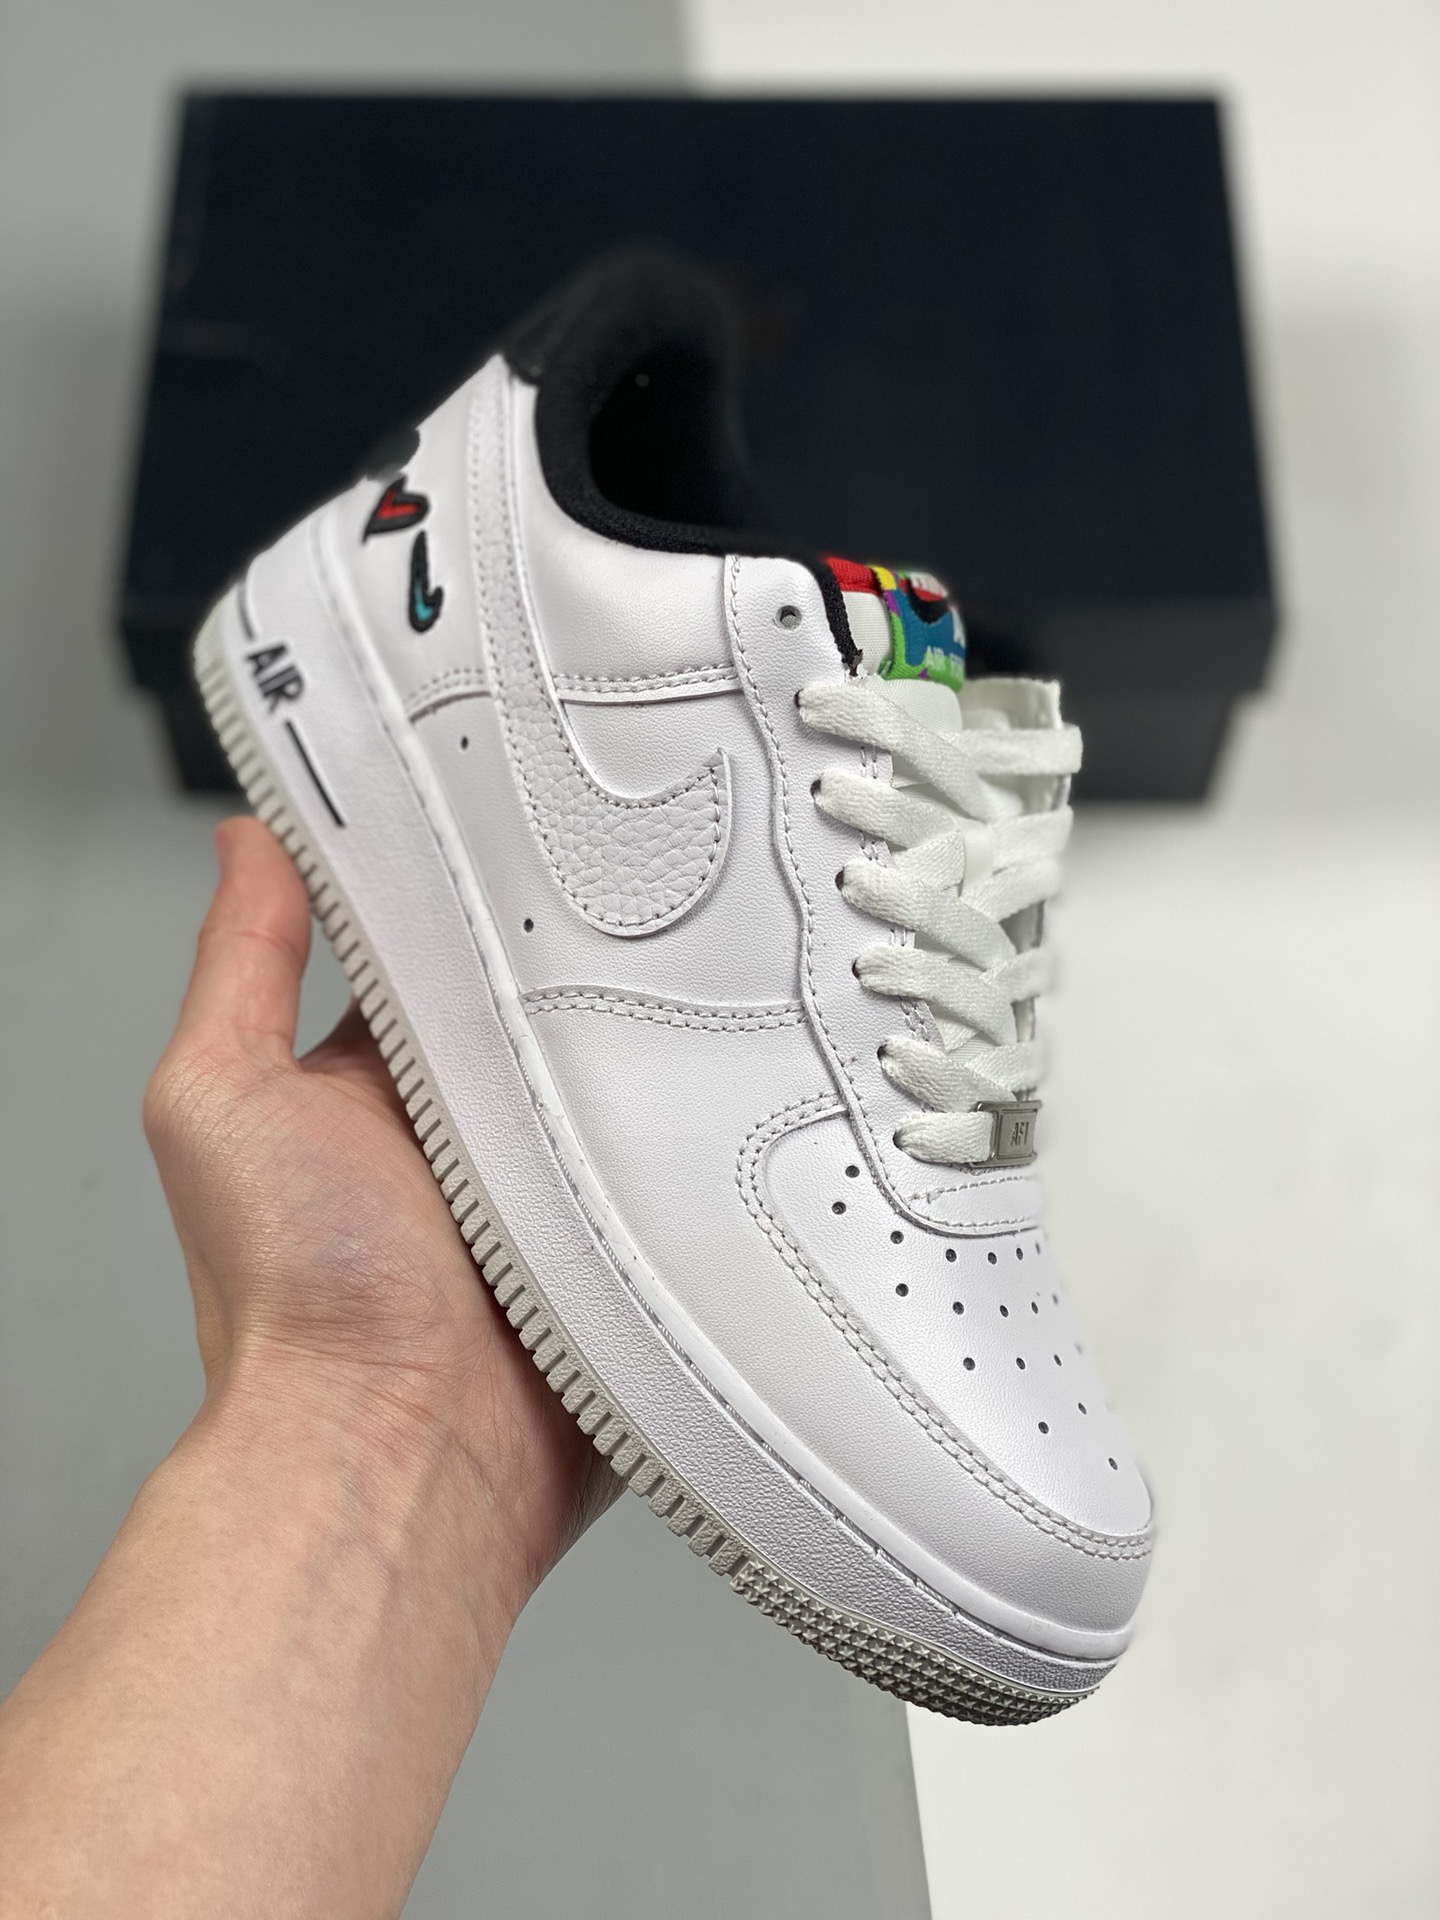 Nike Air AF Force 1 Low "Peace, Love, Swoosh" White University Red Shoes